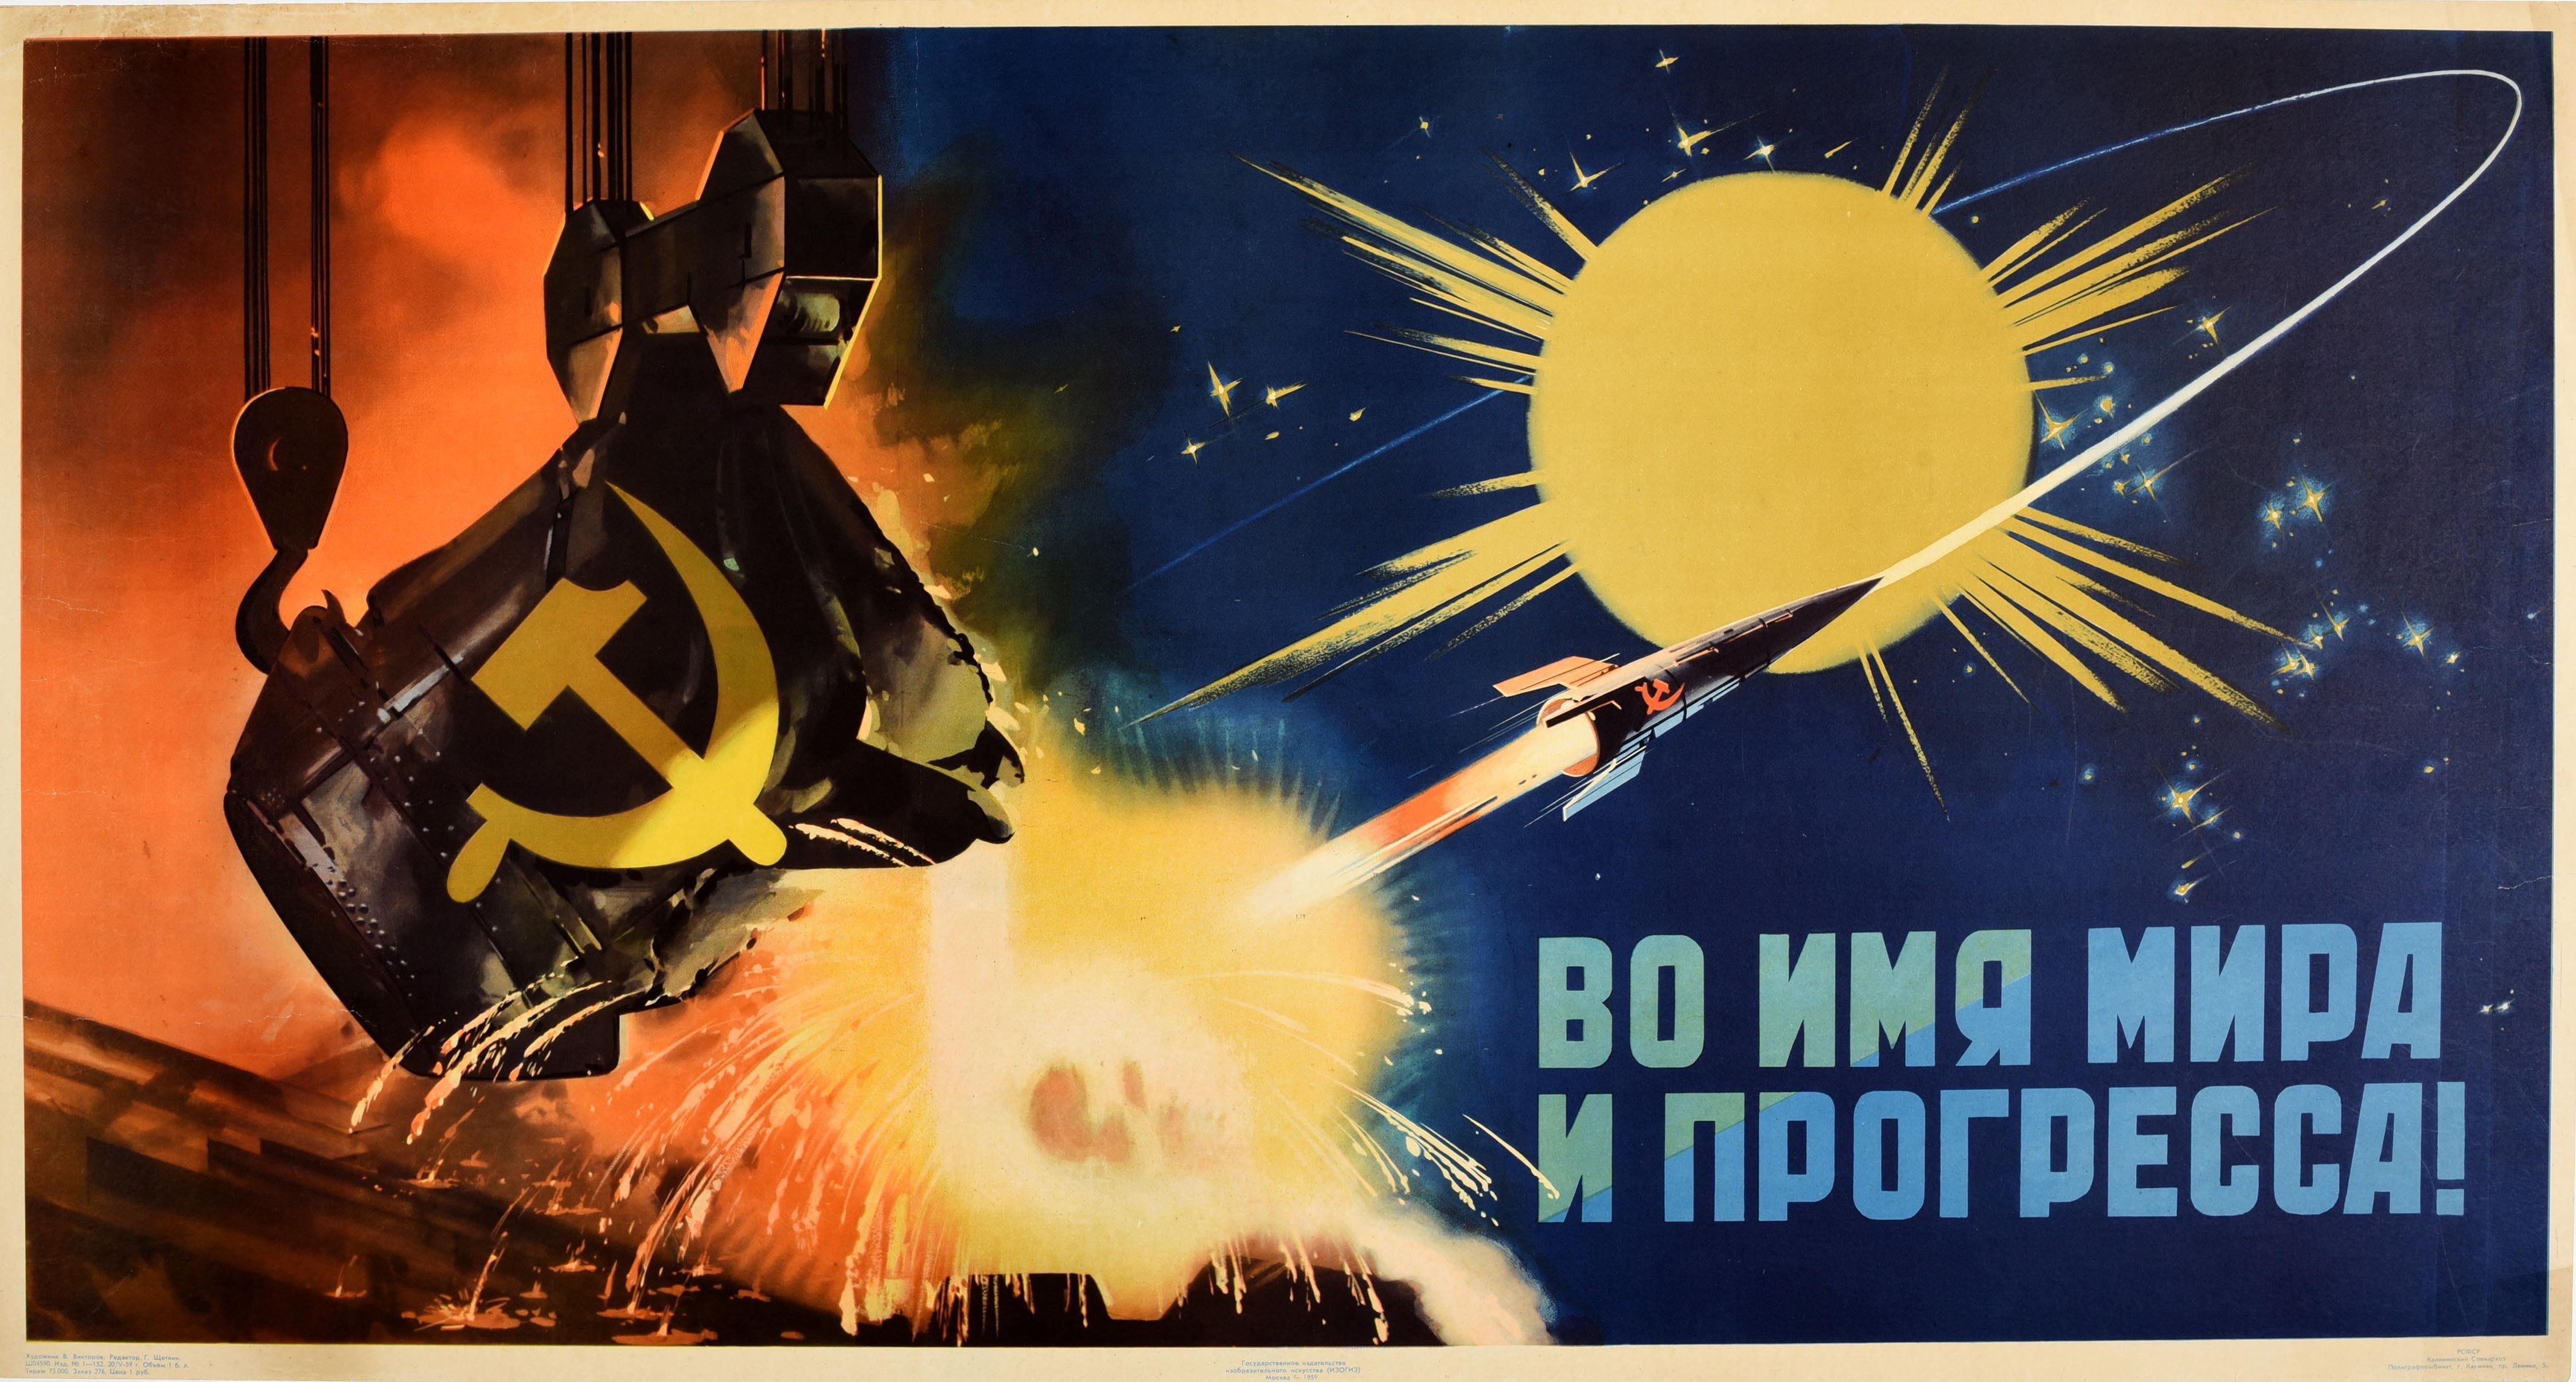 Original Vintage Soviet Poster In The Name Of Peace And Progress USSR Space Race - Print by Valentin Viktorov